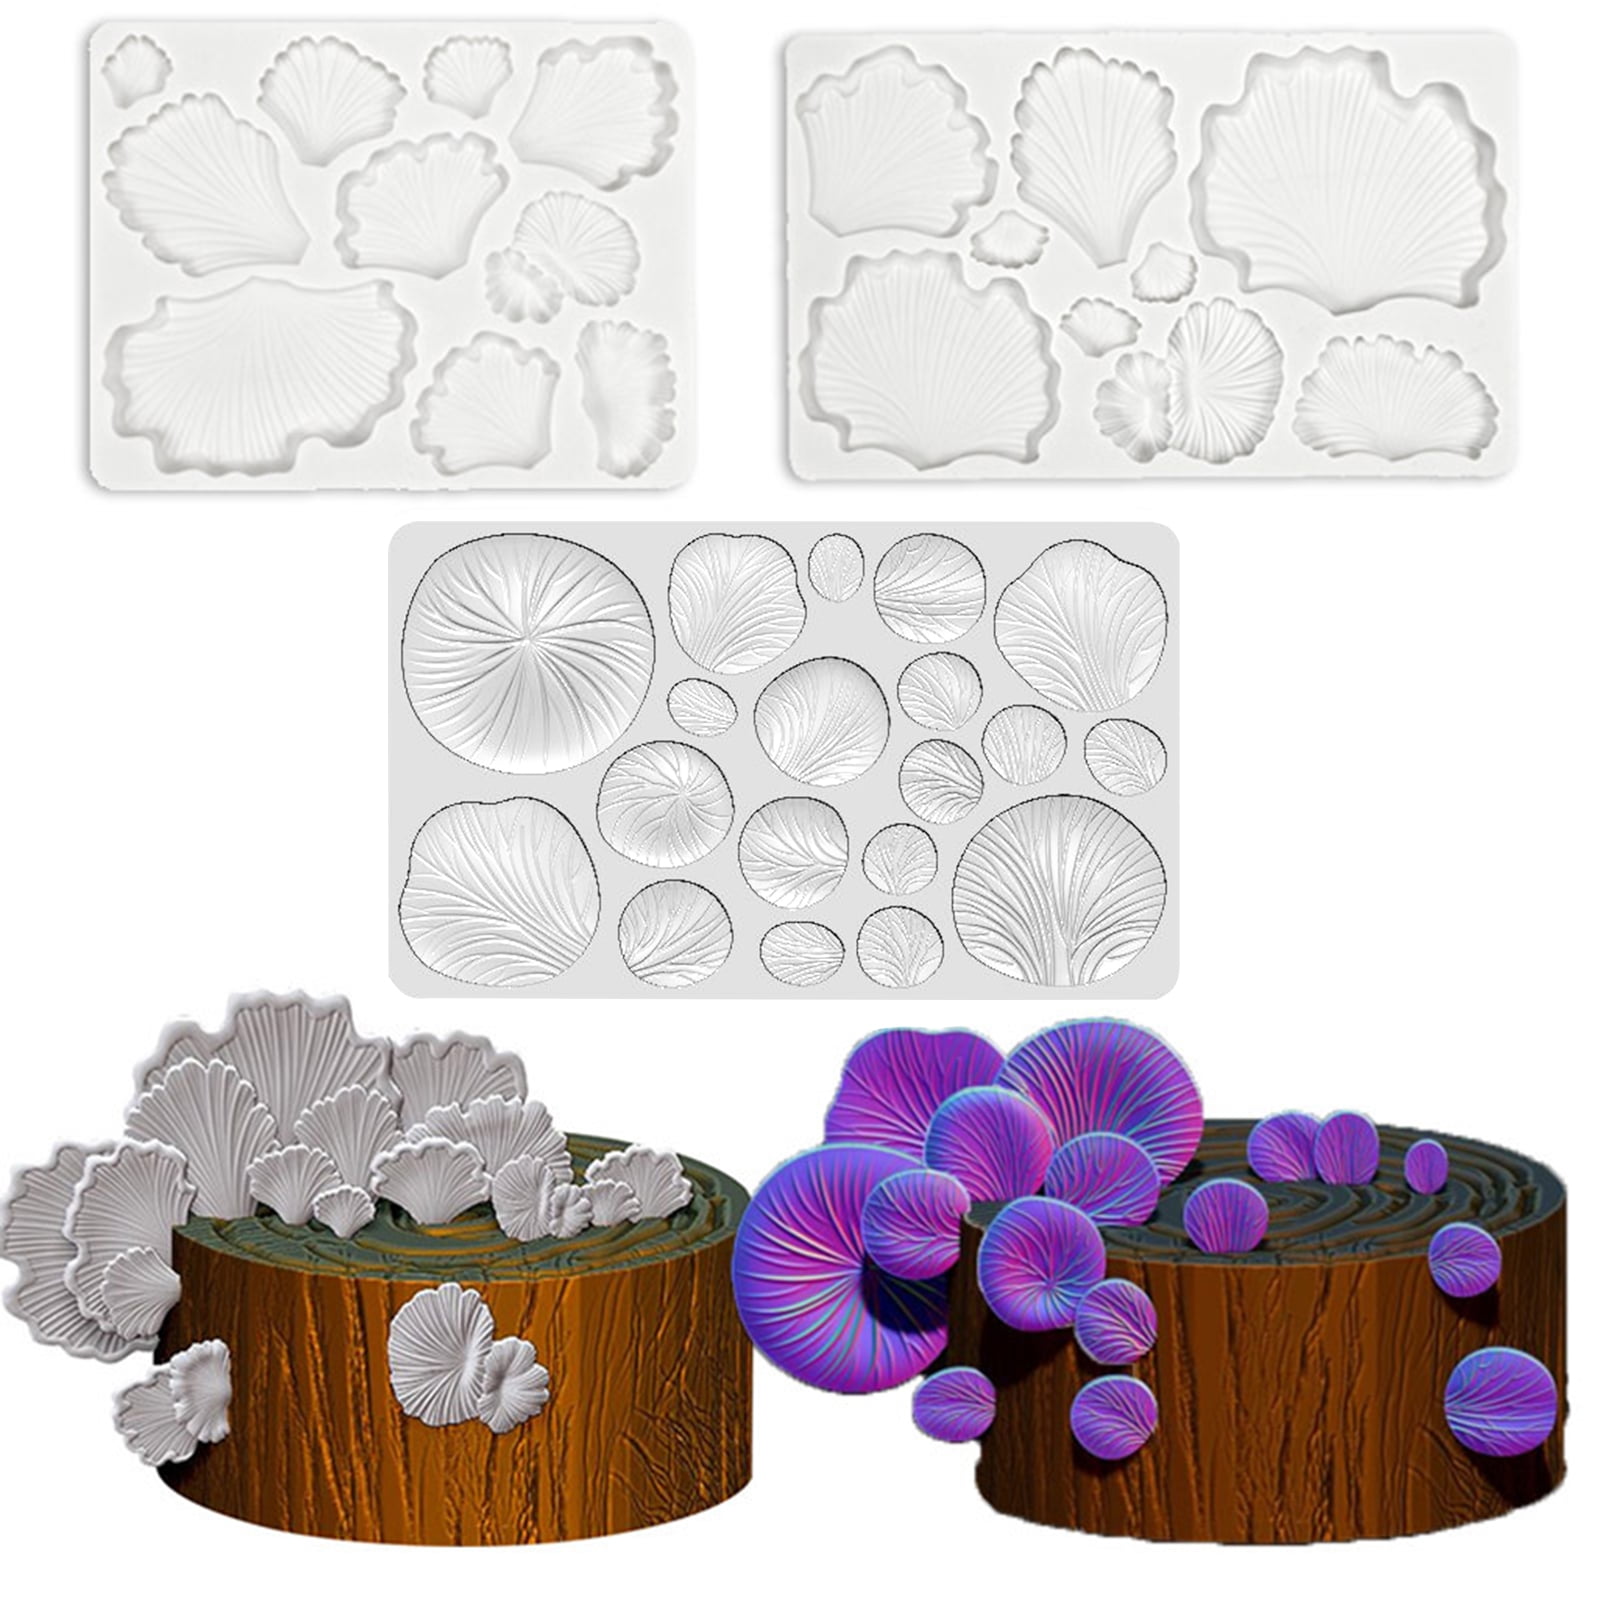 Flower Molds Set of Four Flexible Silicone Moulds Food Safe